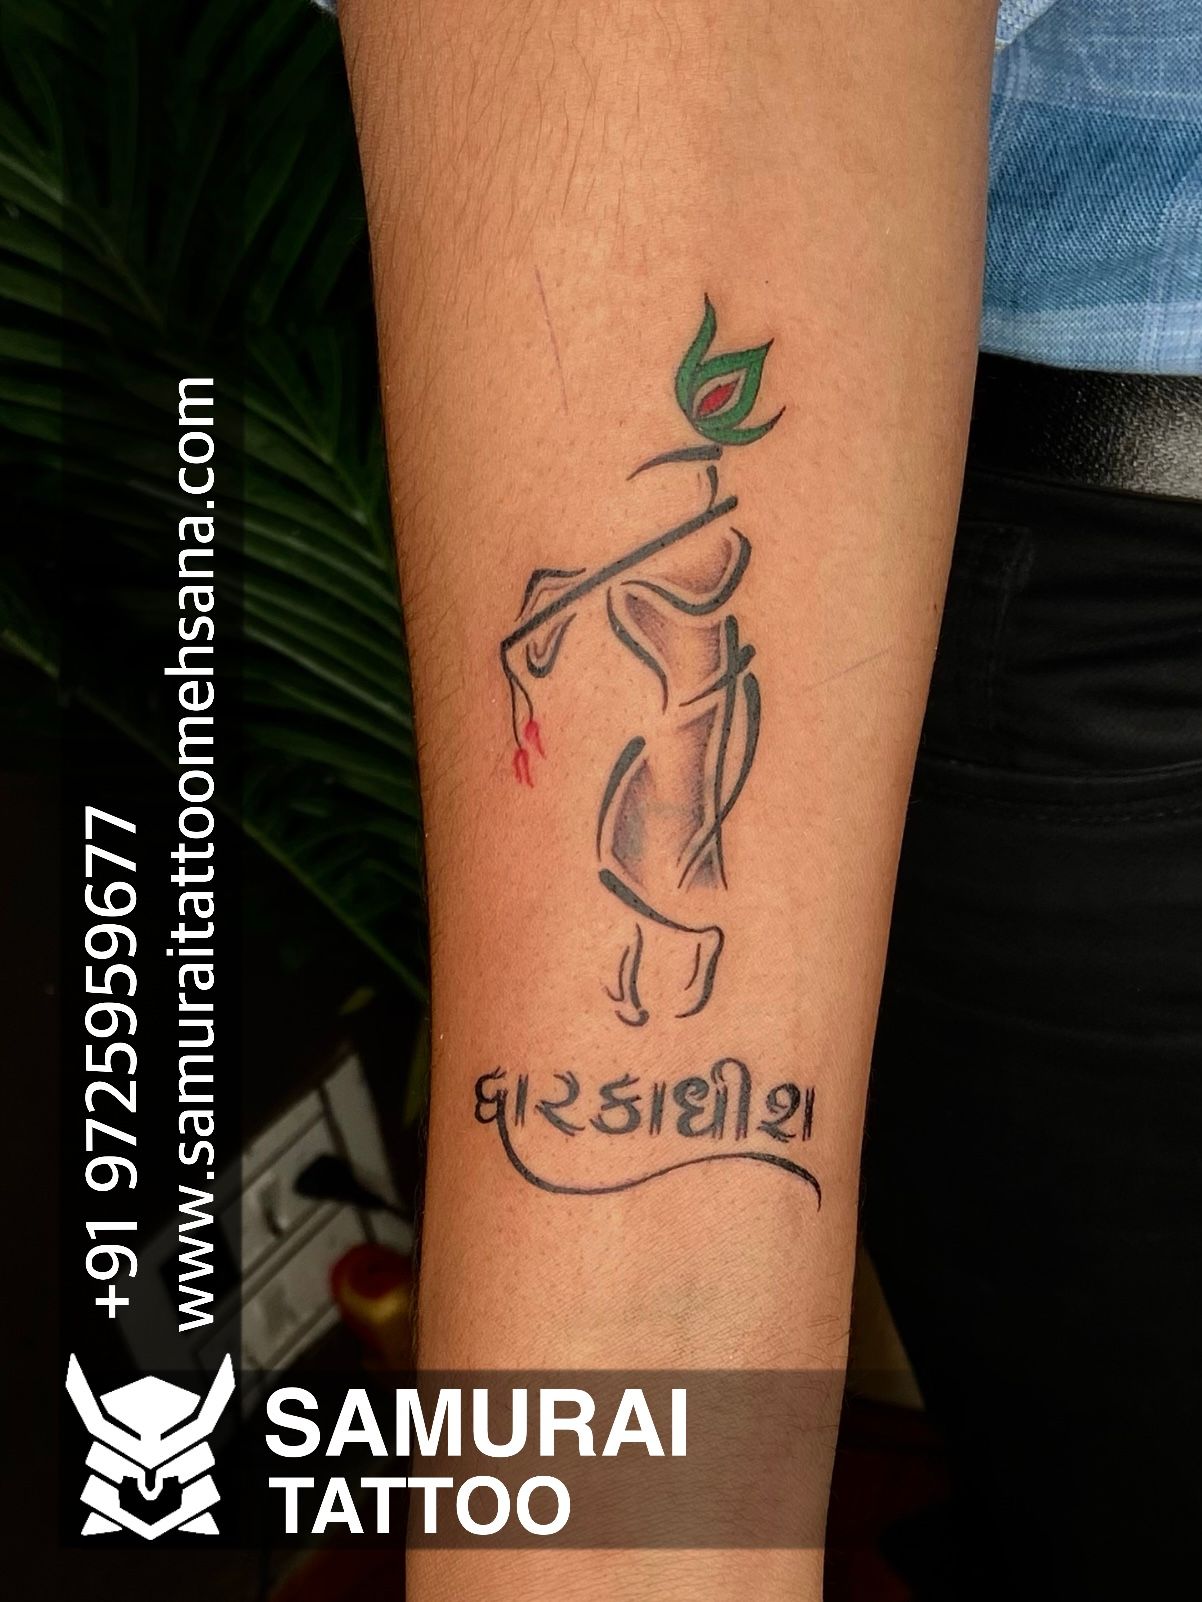 Shree krishna name tattoo || shree krishna name tattoo design with peacock  feather | Hand and finger tattoos, Krishna tattoo, Name tattoo designs